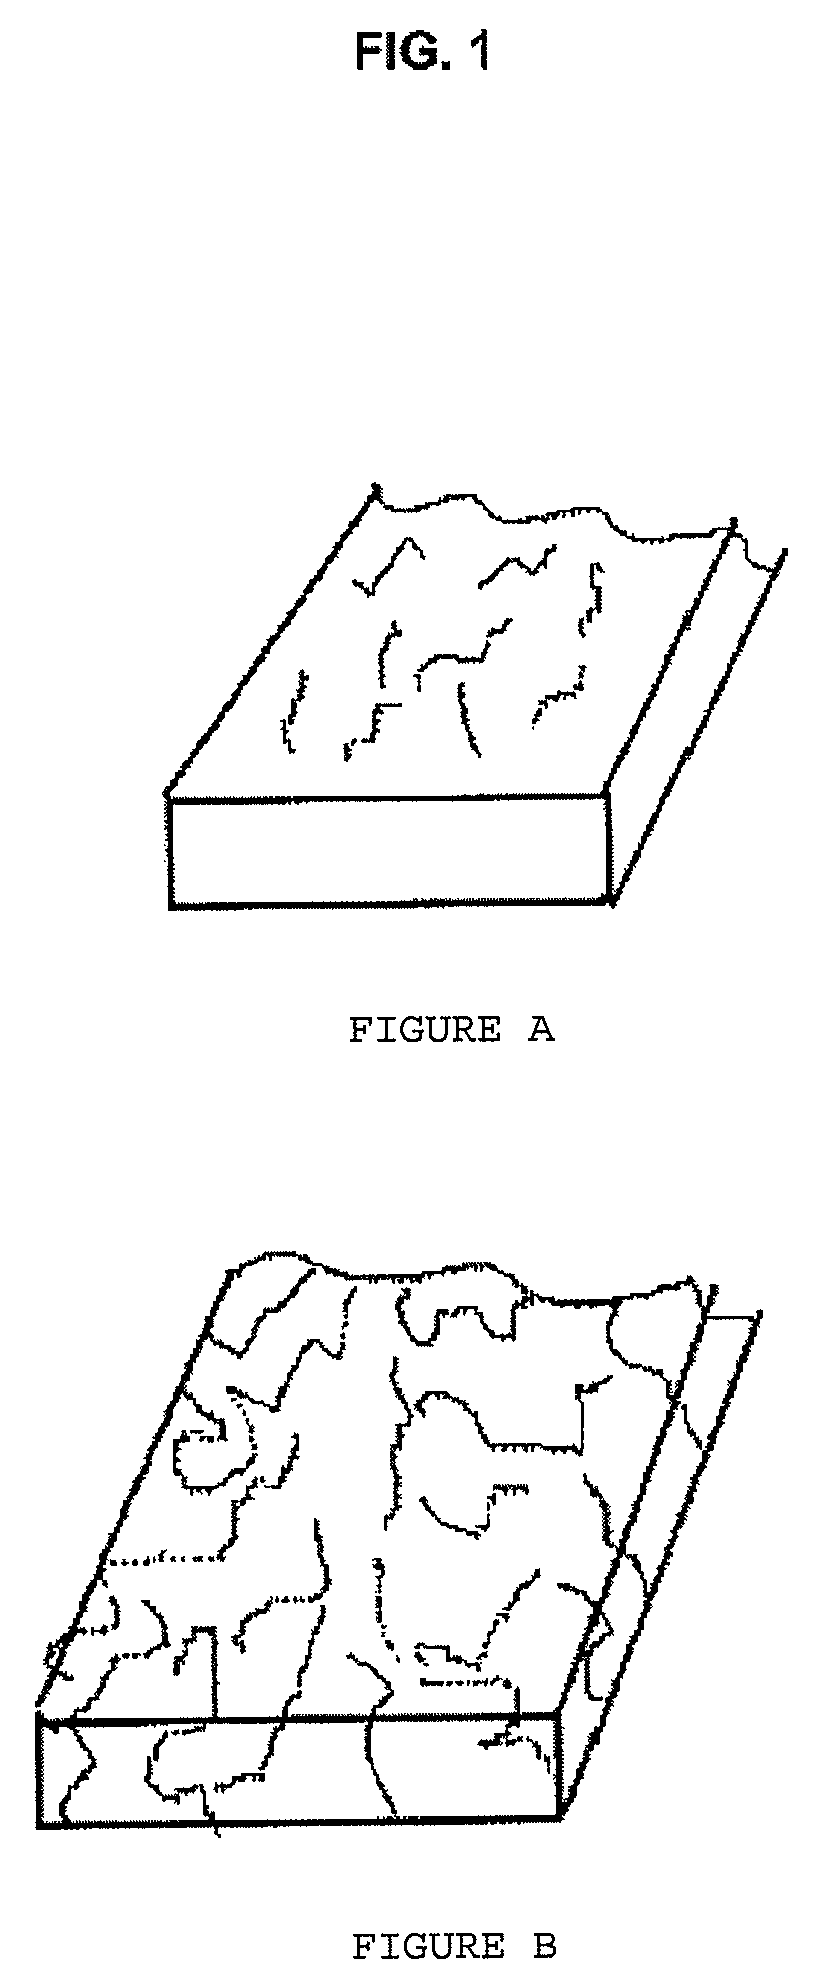 Method of producing slabs of artificial stone and polymerisable resin having a veined effect by means of vibro-compression under vacuum